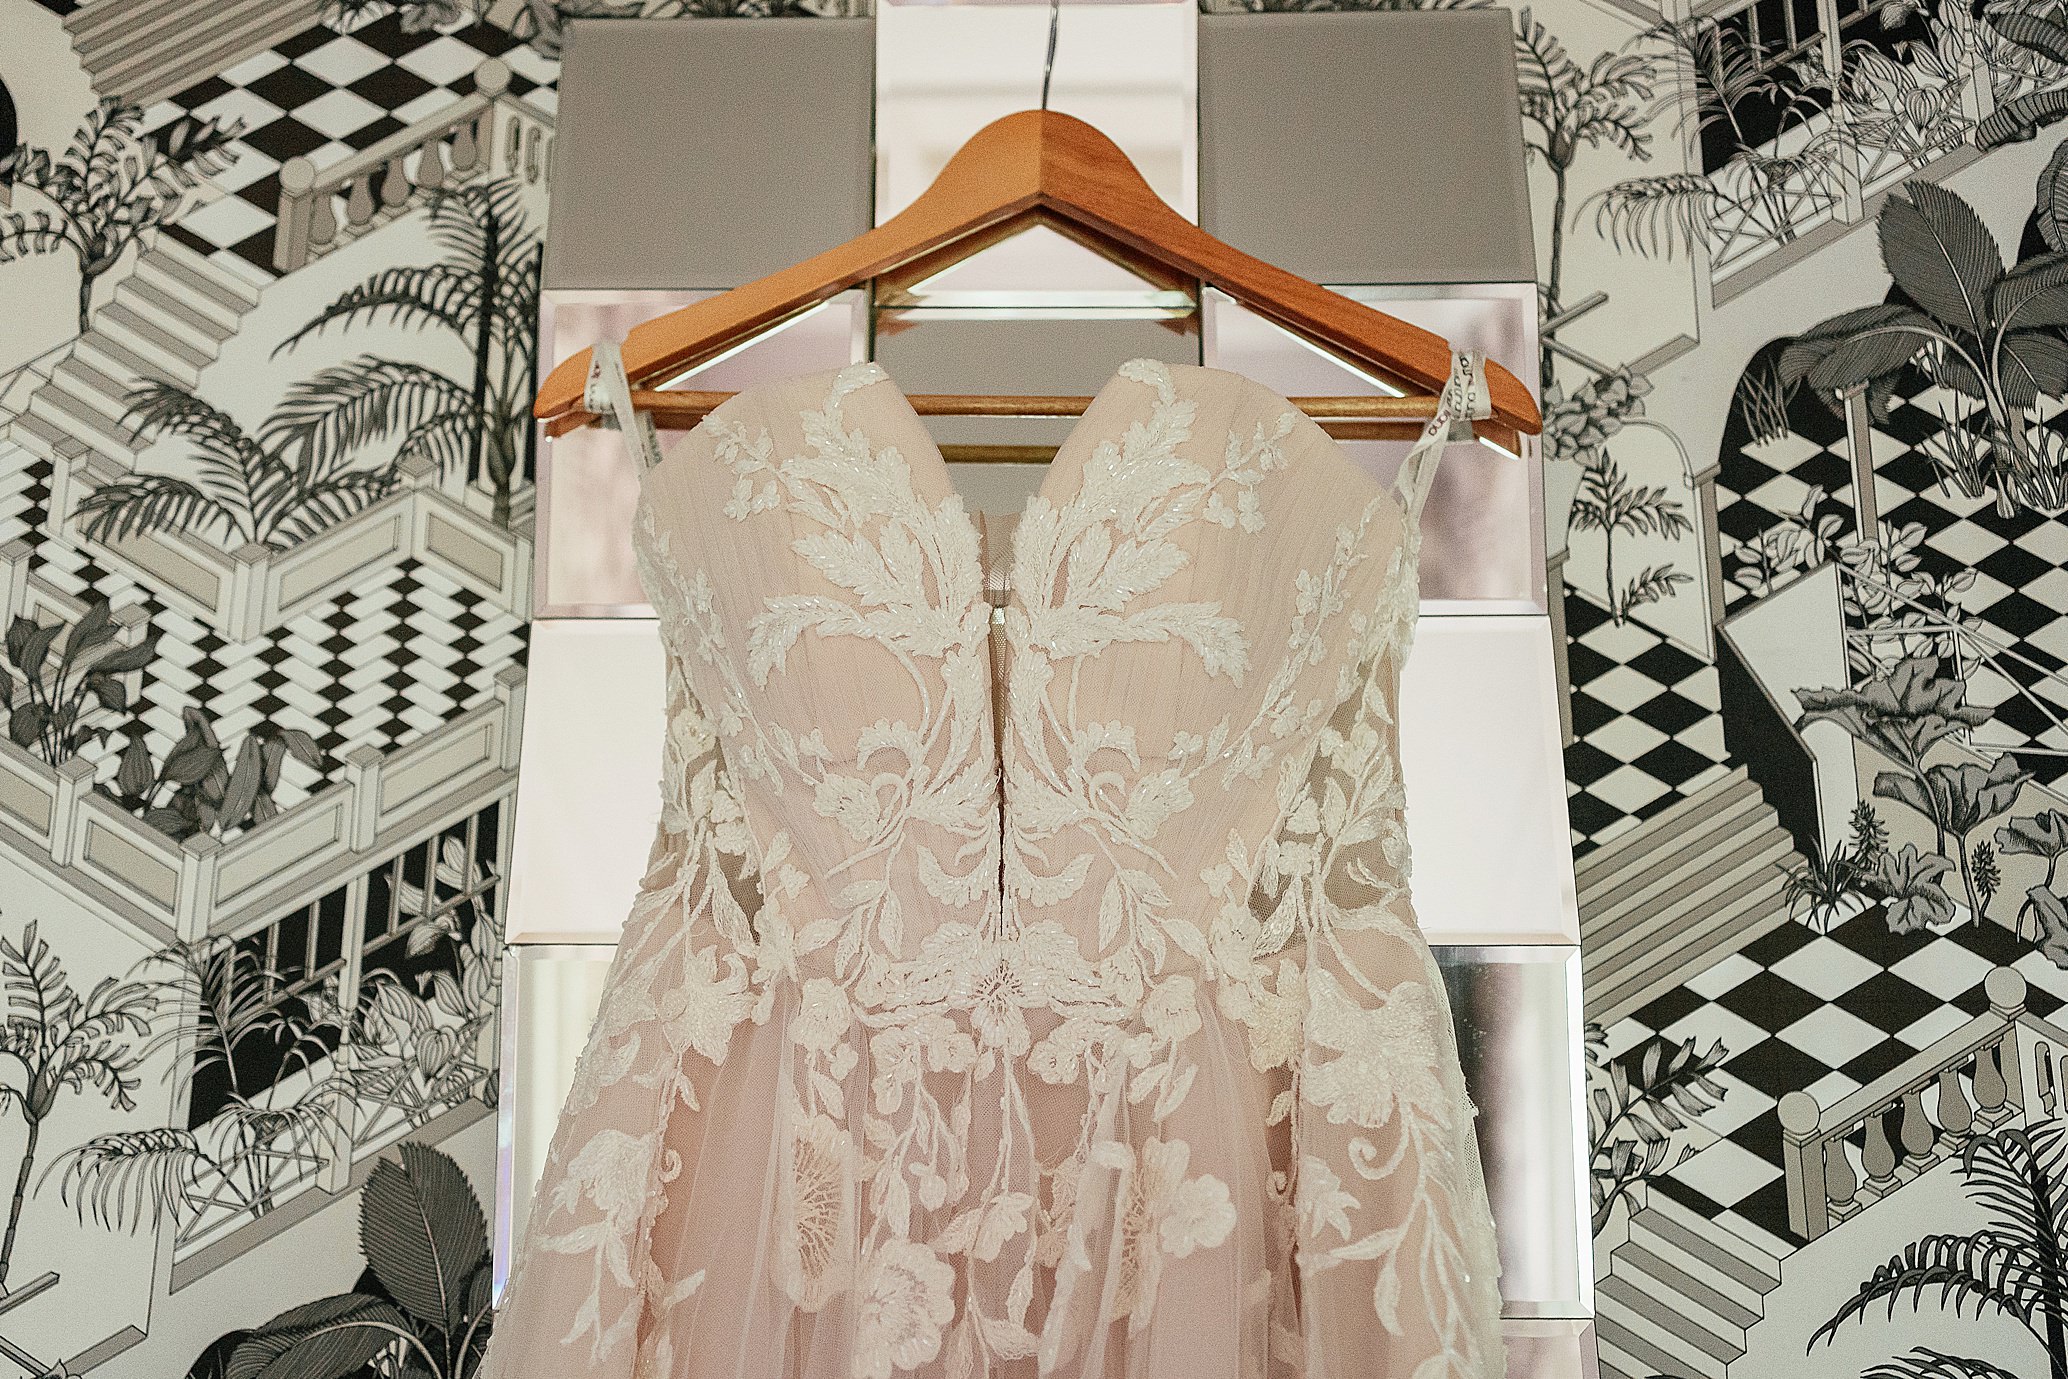 brides lace dress with floral embroidery hanging in room DIY pollokshields burgh hall wedding